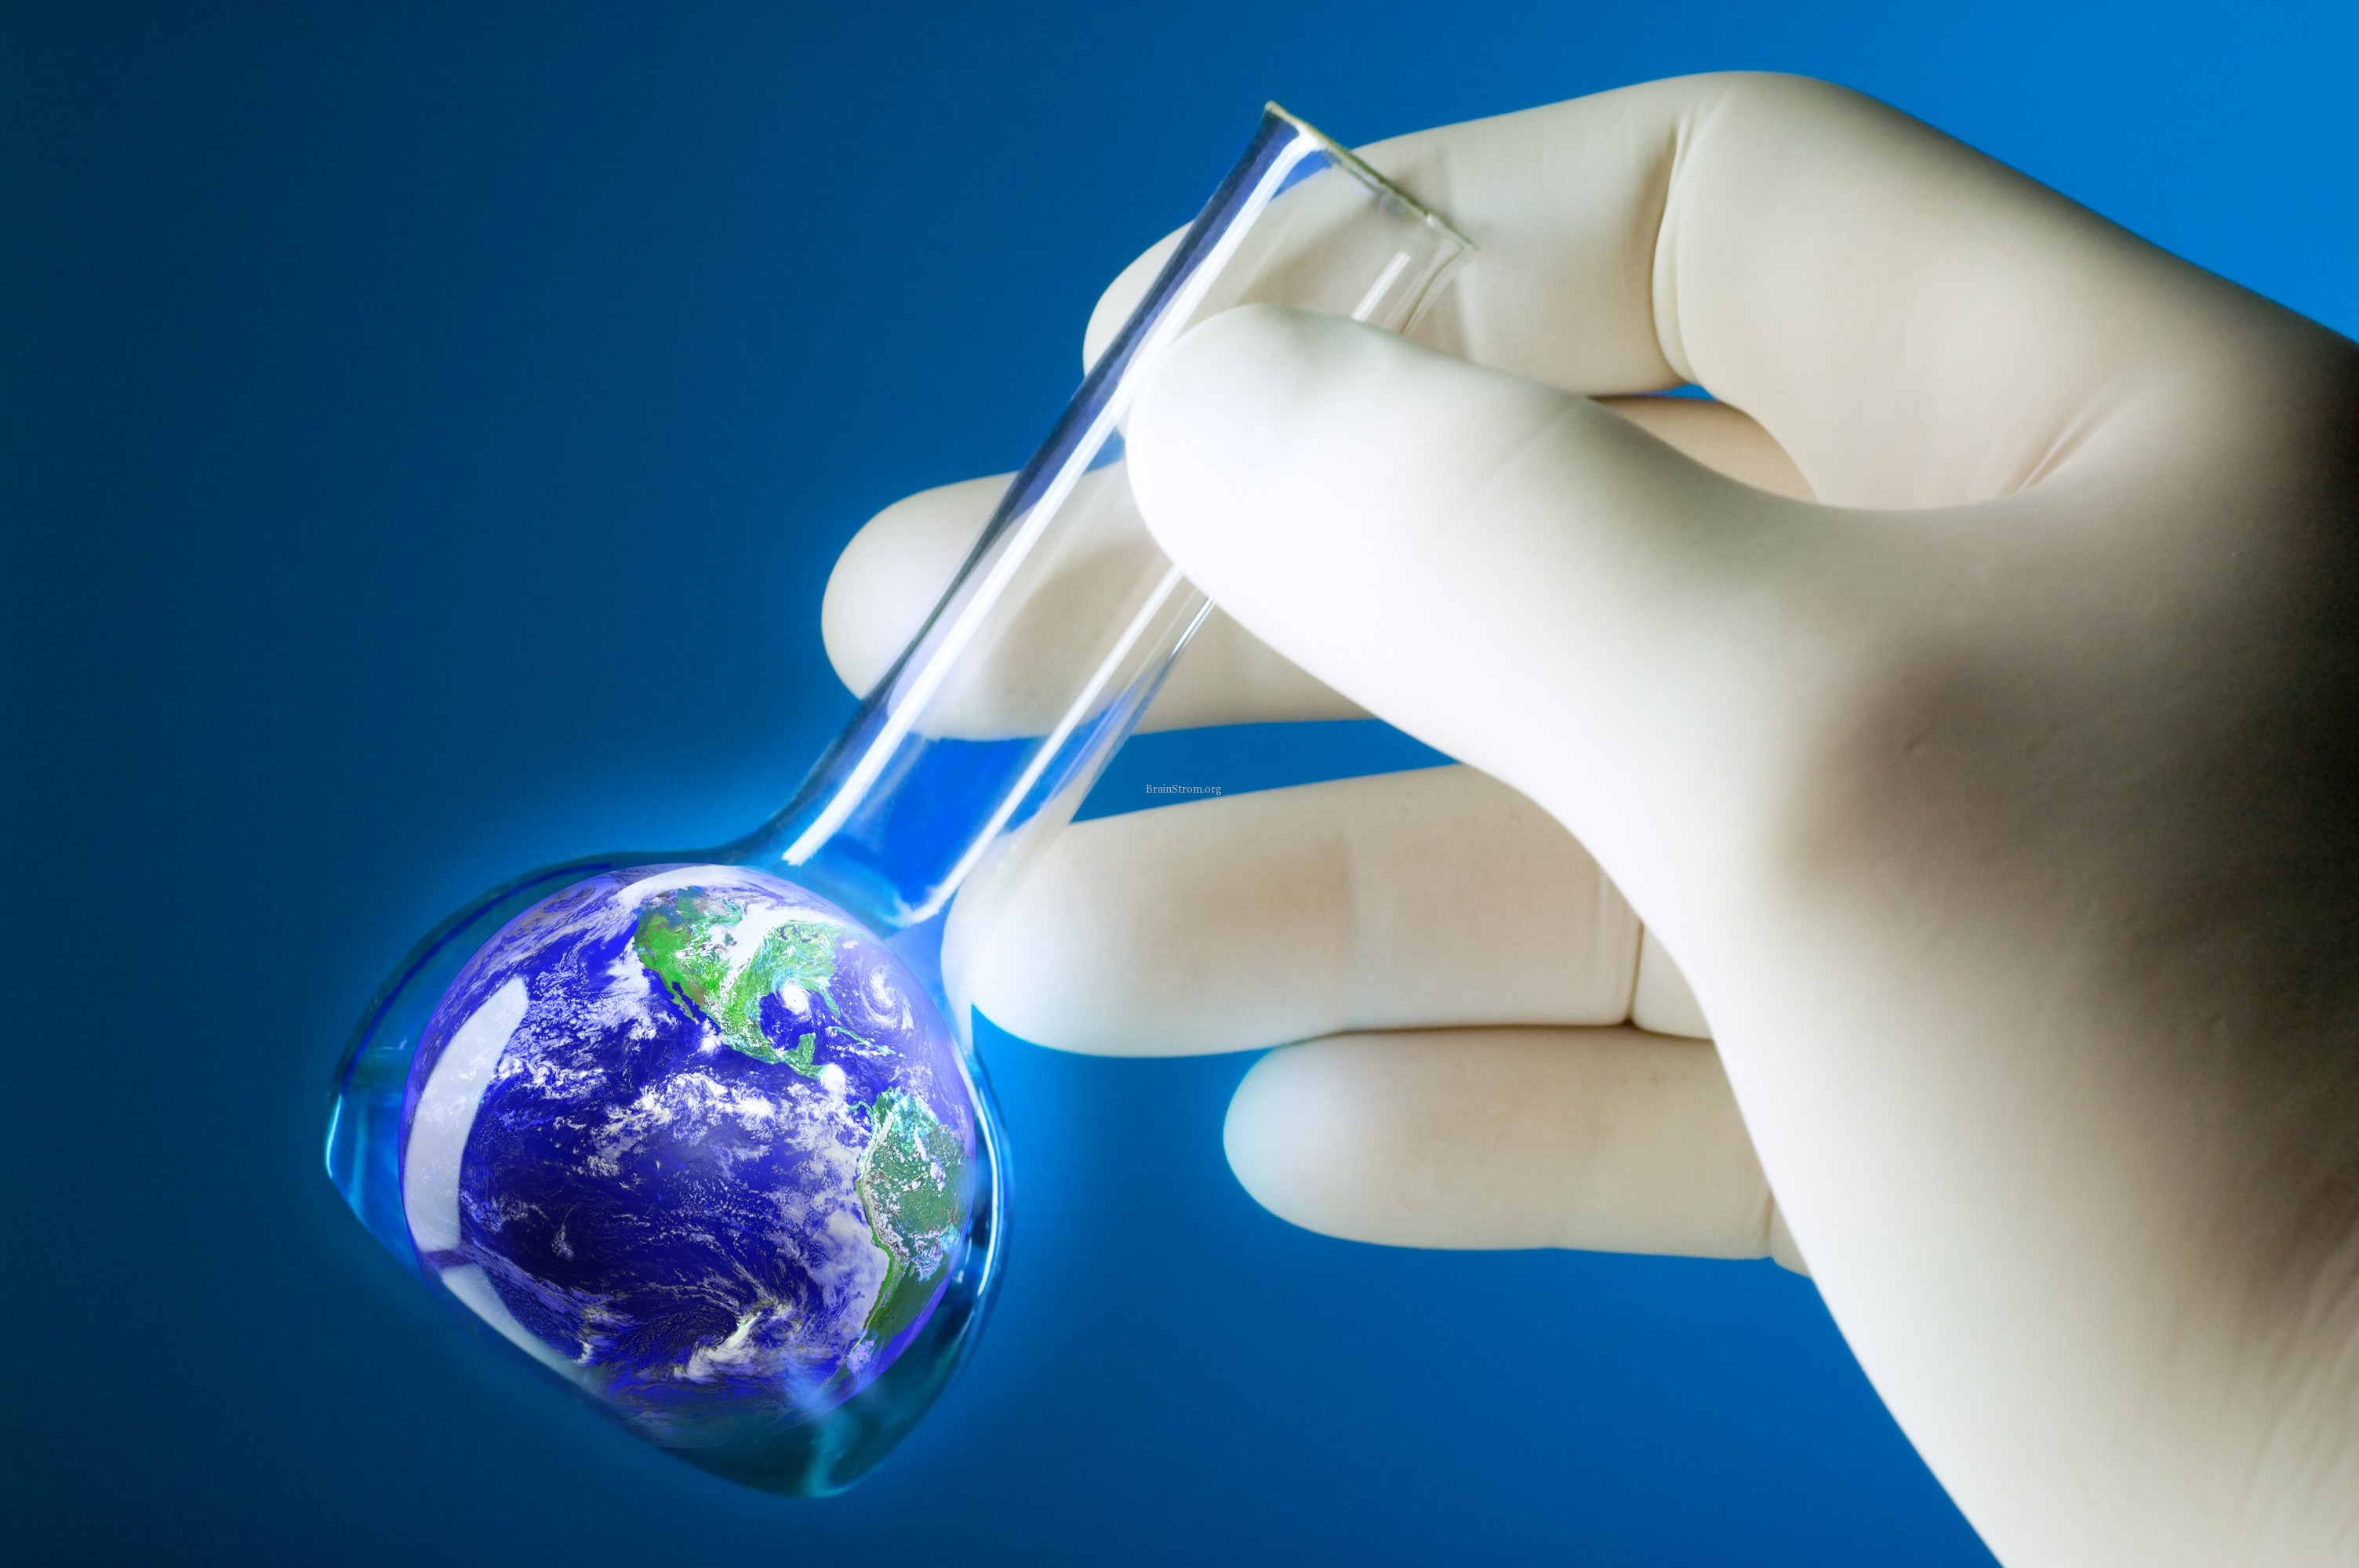 Global Biopharmaceutical Industry: Myth or Reality